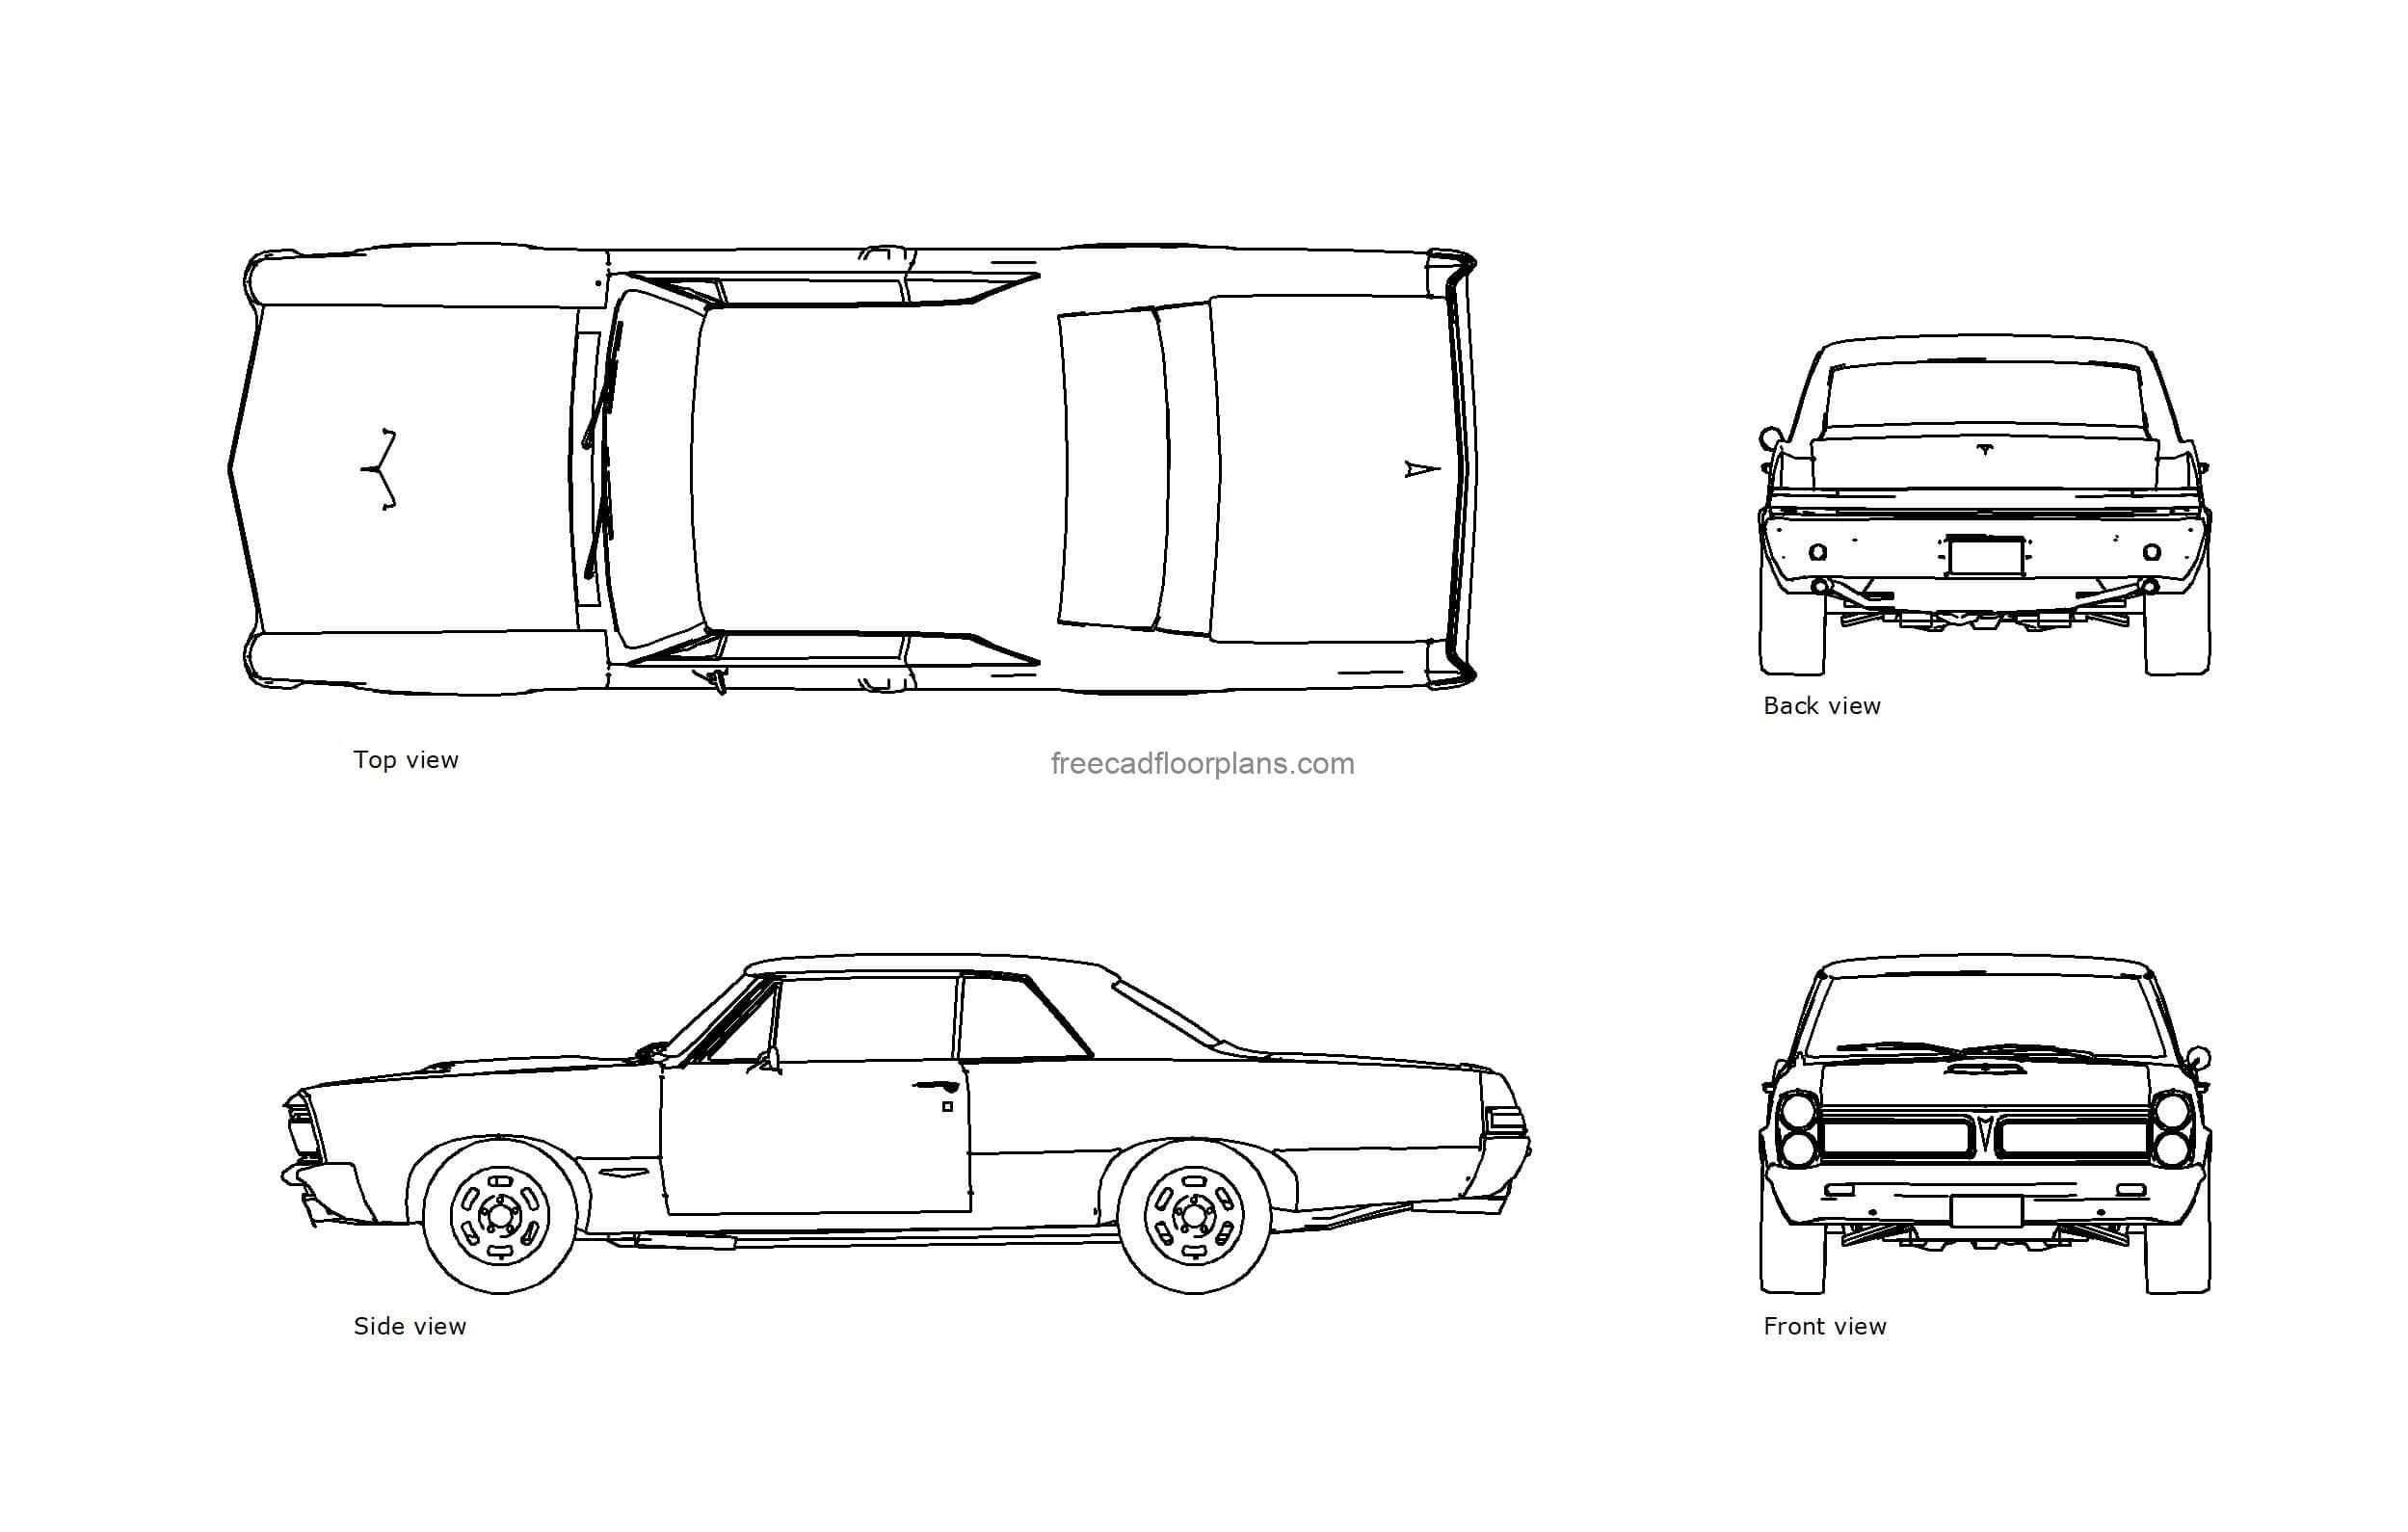 autocad drawing of a pontiac gto car, plan and elevation 2d views, dwg file free for download